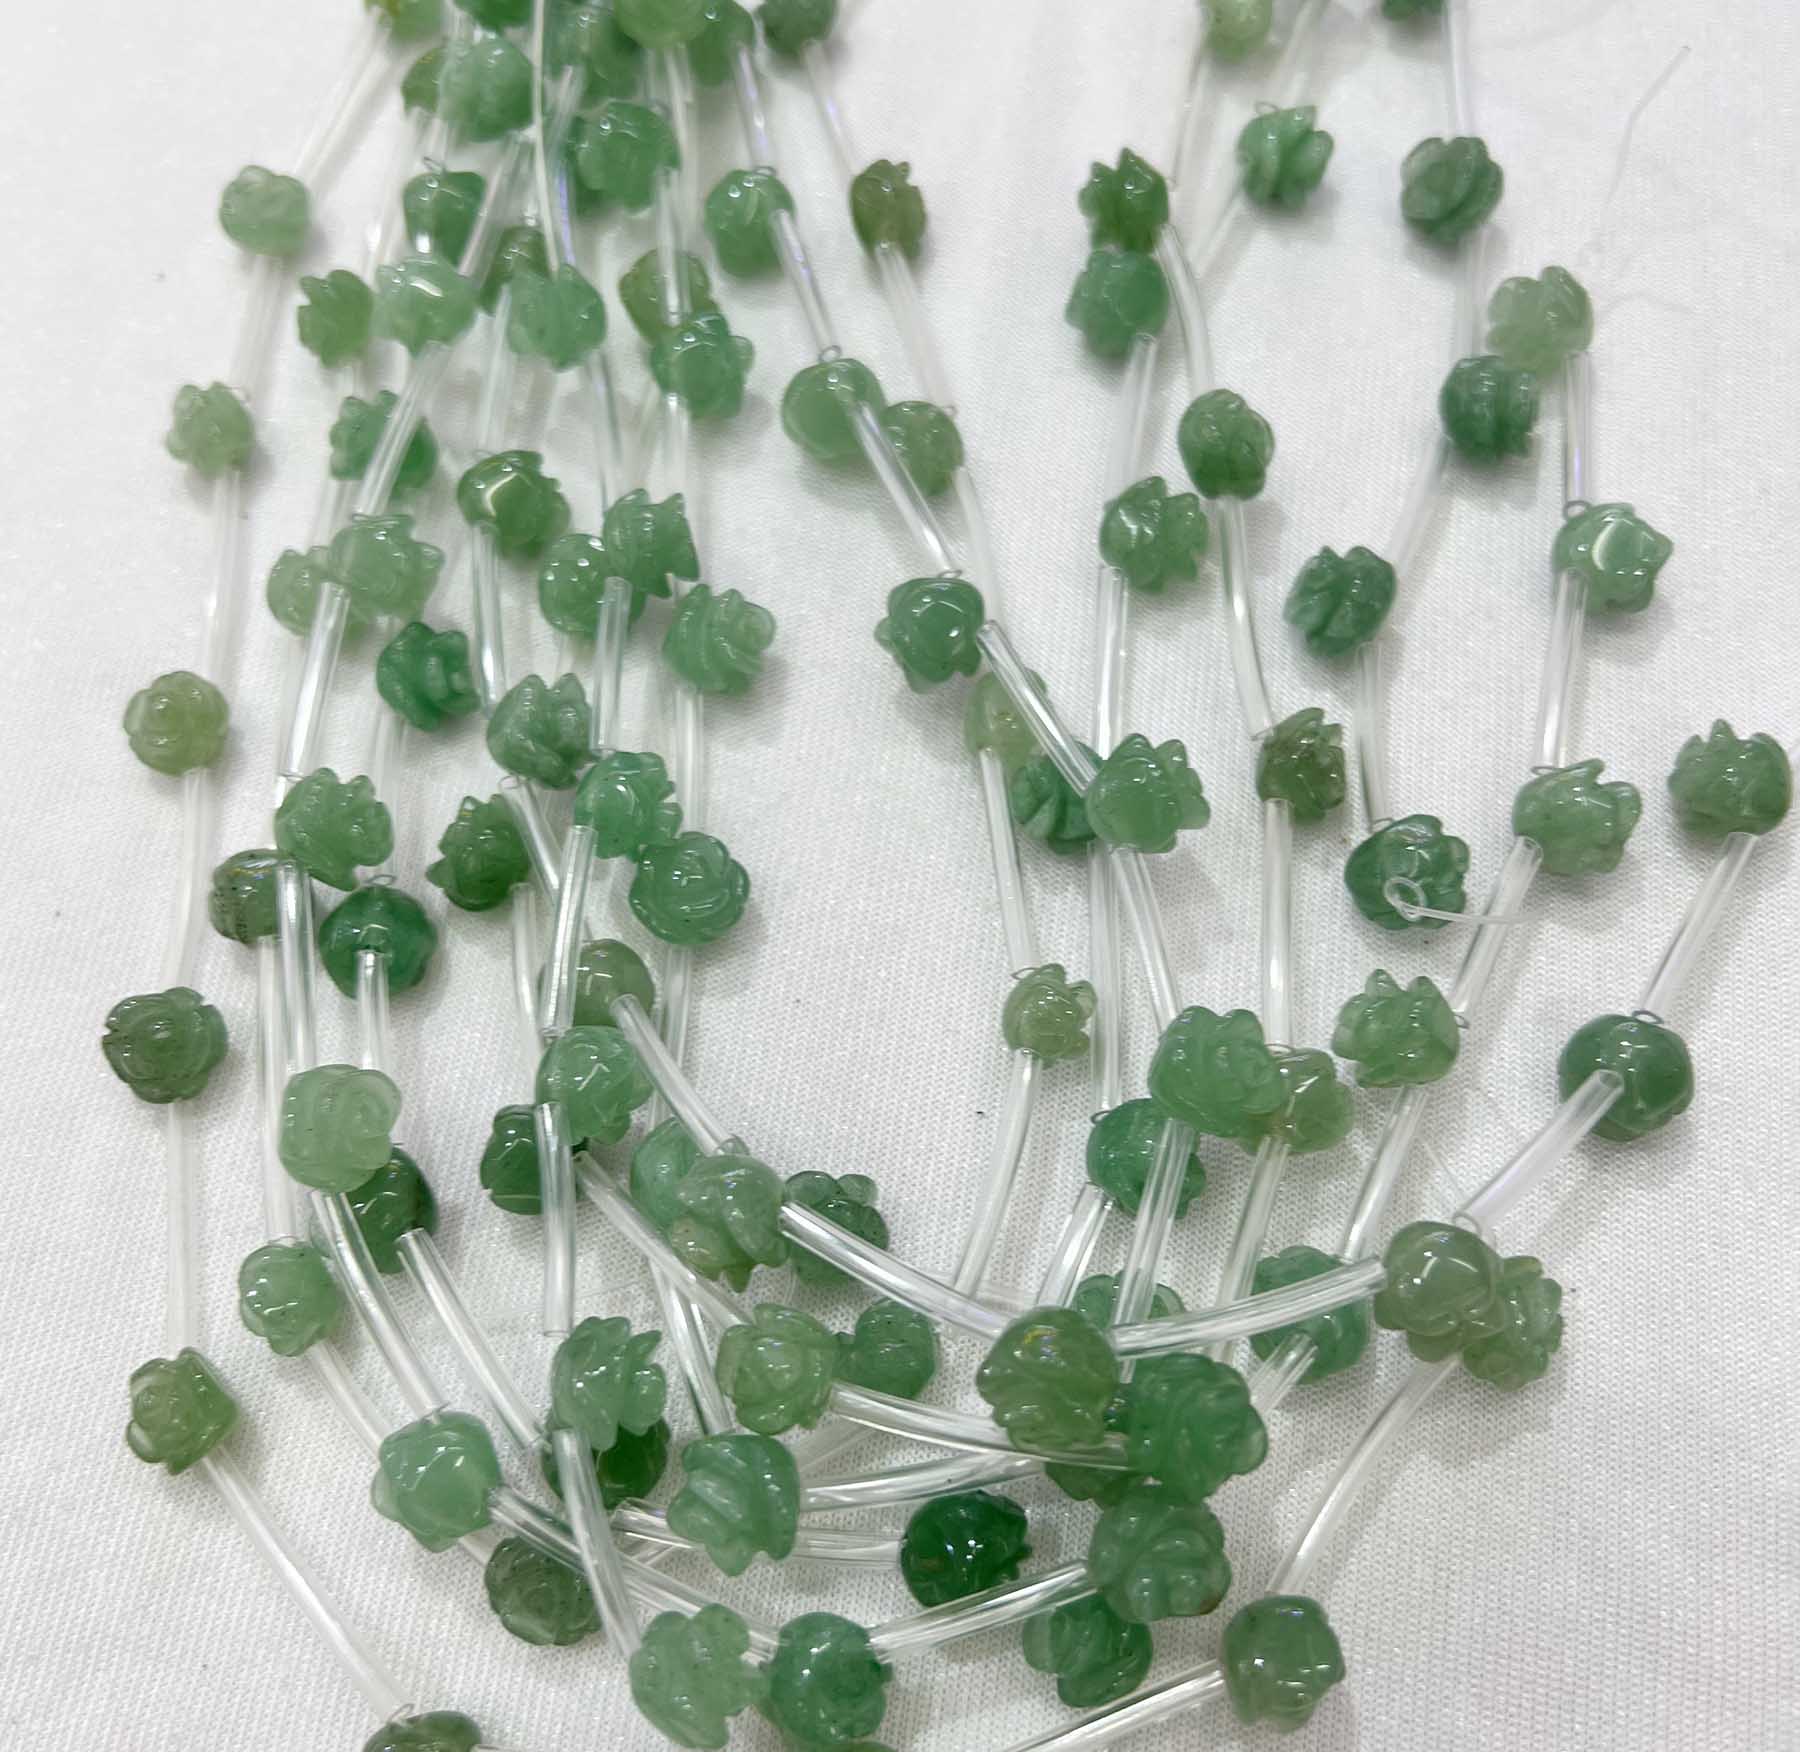 Flowers Of Natural Stones Green Aventurine Attractting For Necklaces Bracelets Earrings